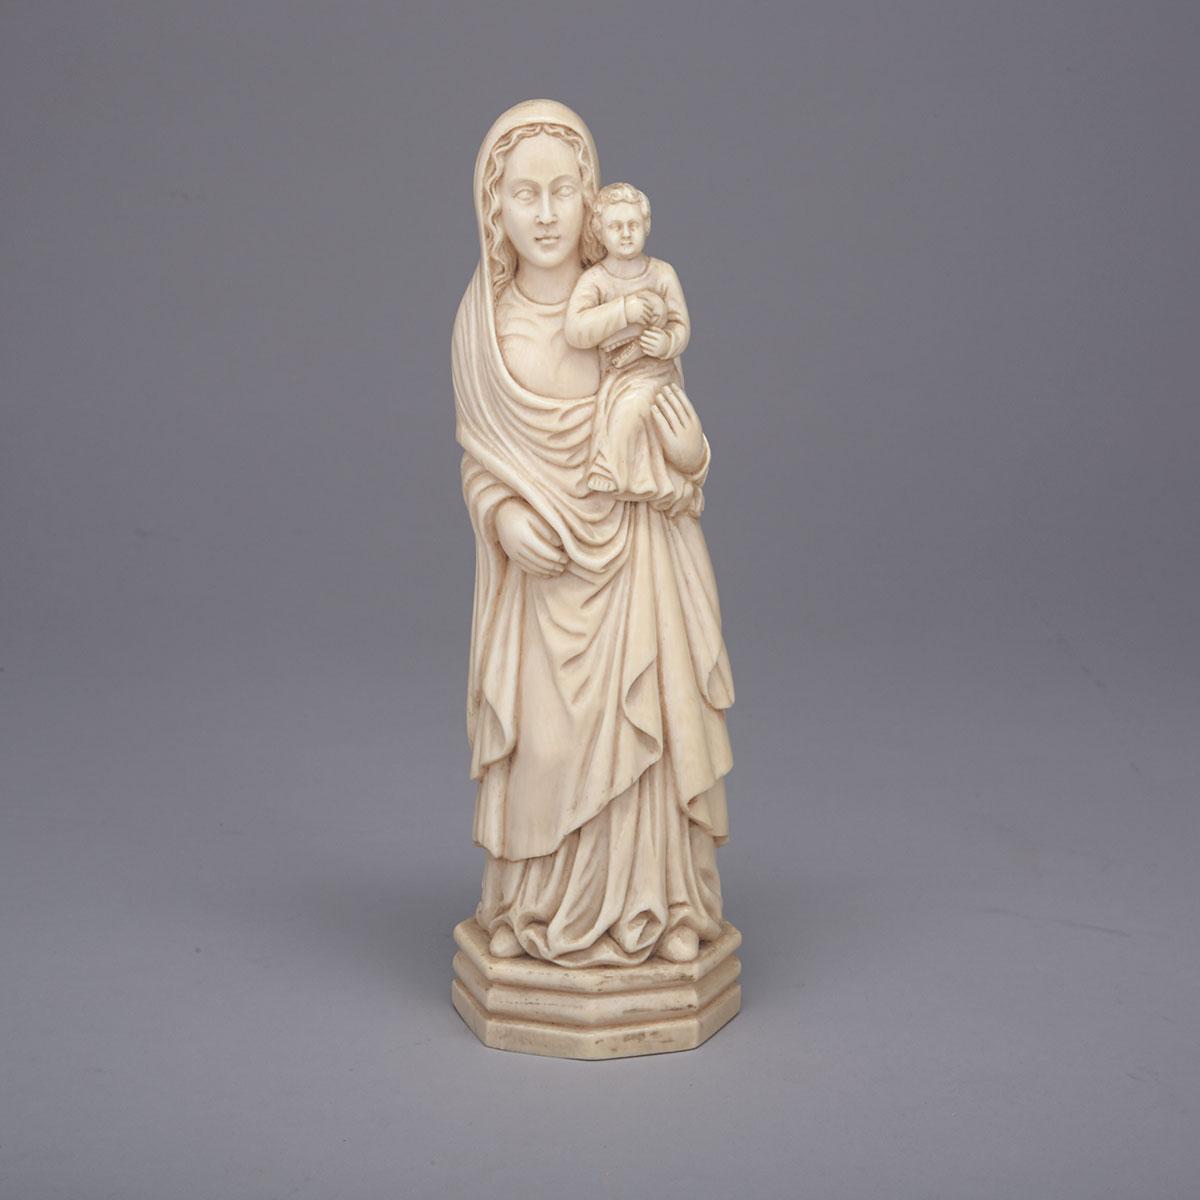 Carved Ivory Group of the Madonna and Child, early 20th century